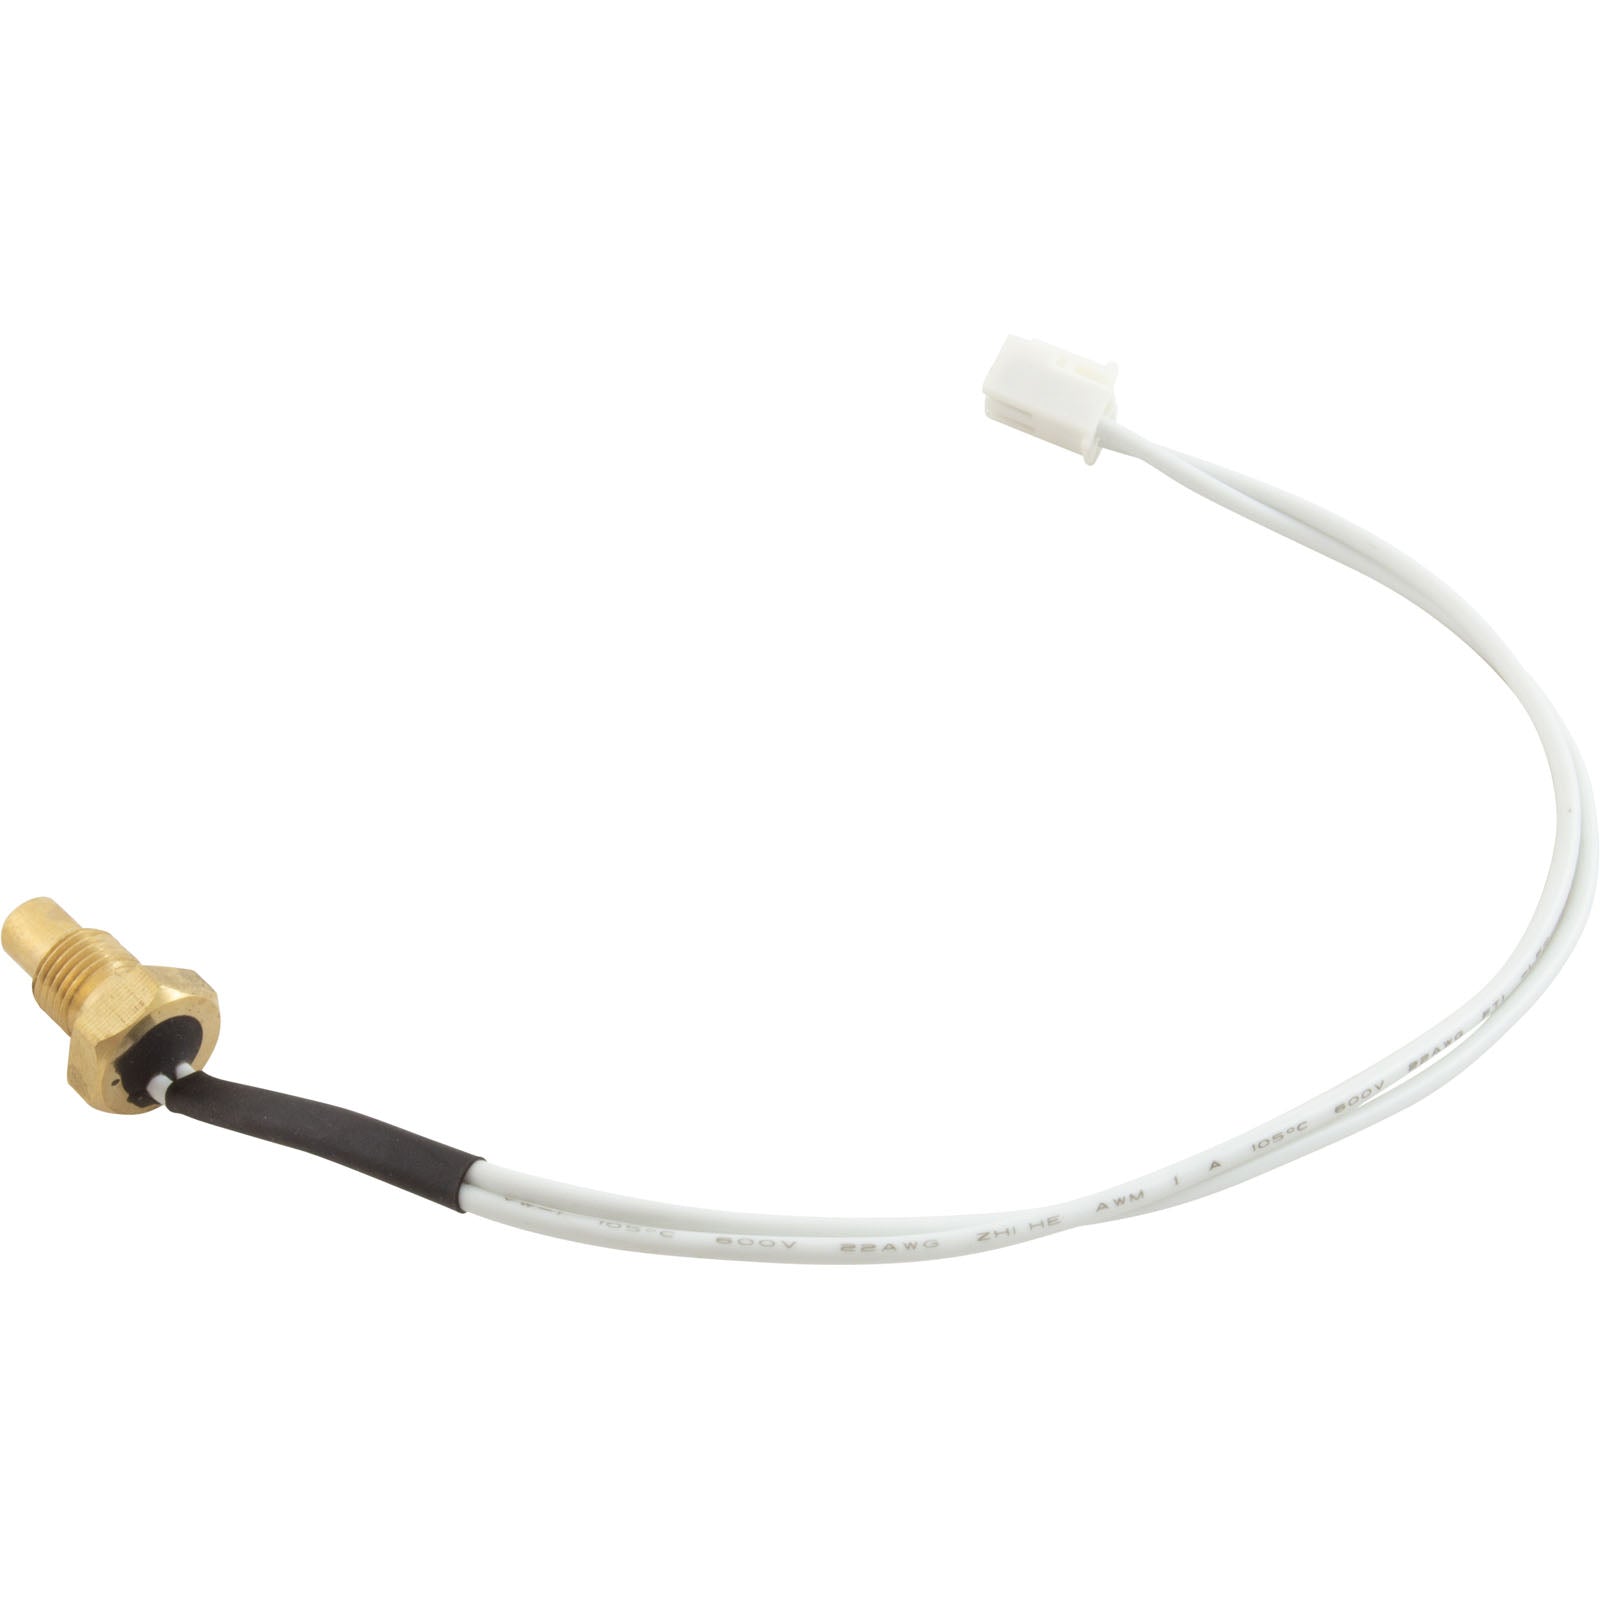 Water Sensor, Raypak, Inlet & Outlet 017161F